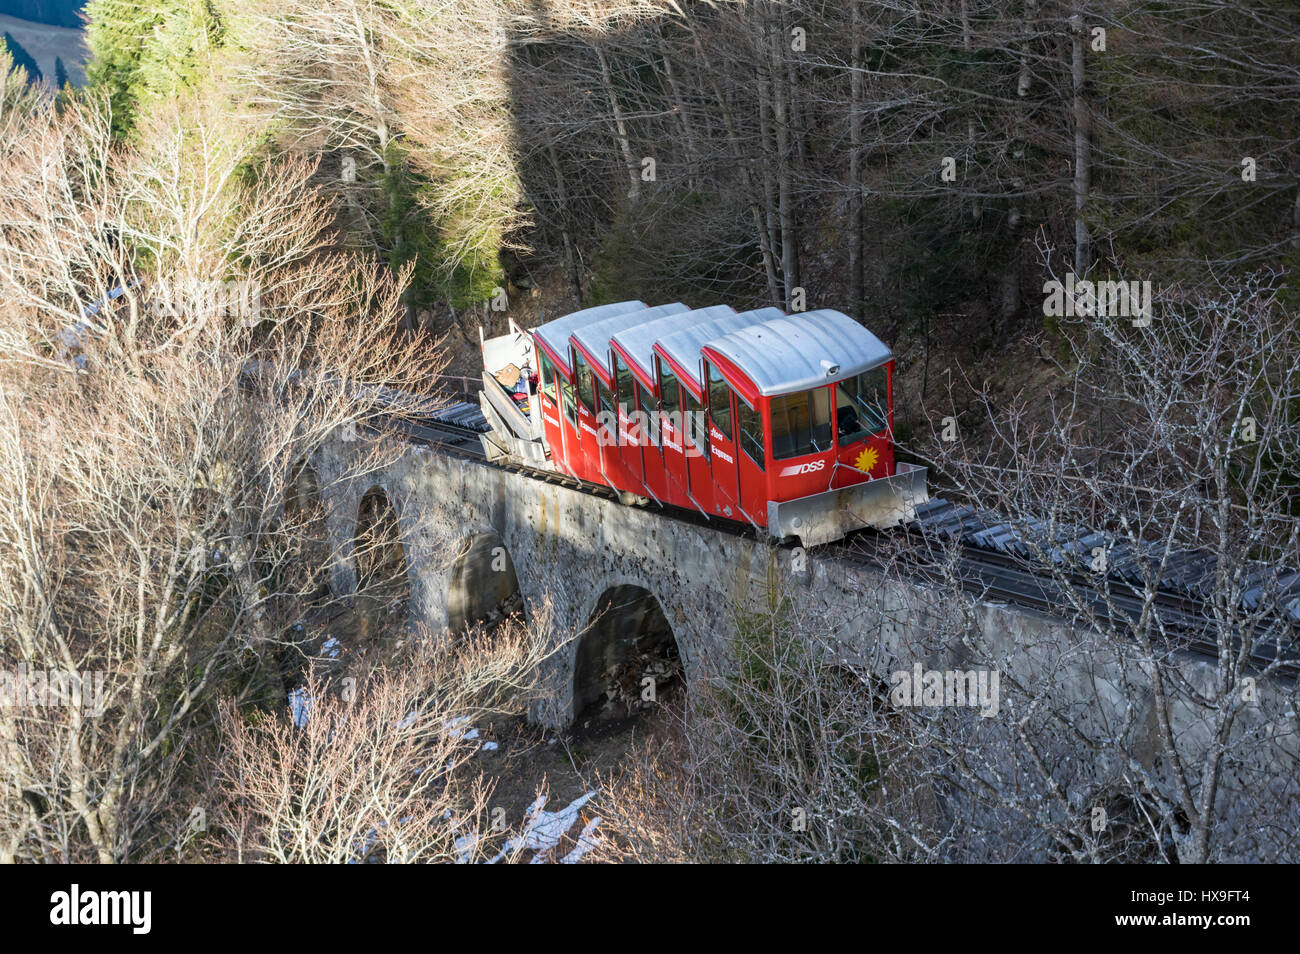 Red car of the old Schlattli-Stoos funicular approaching its top station on a steep viaduct. Stoos, Schwyz, Switzerland. Stock Photo